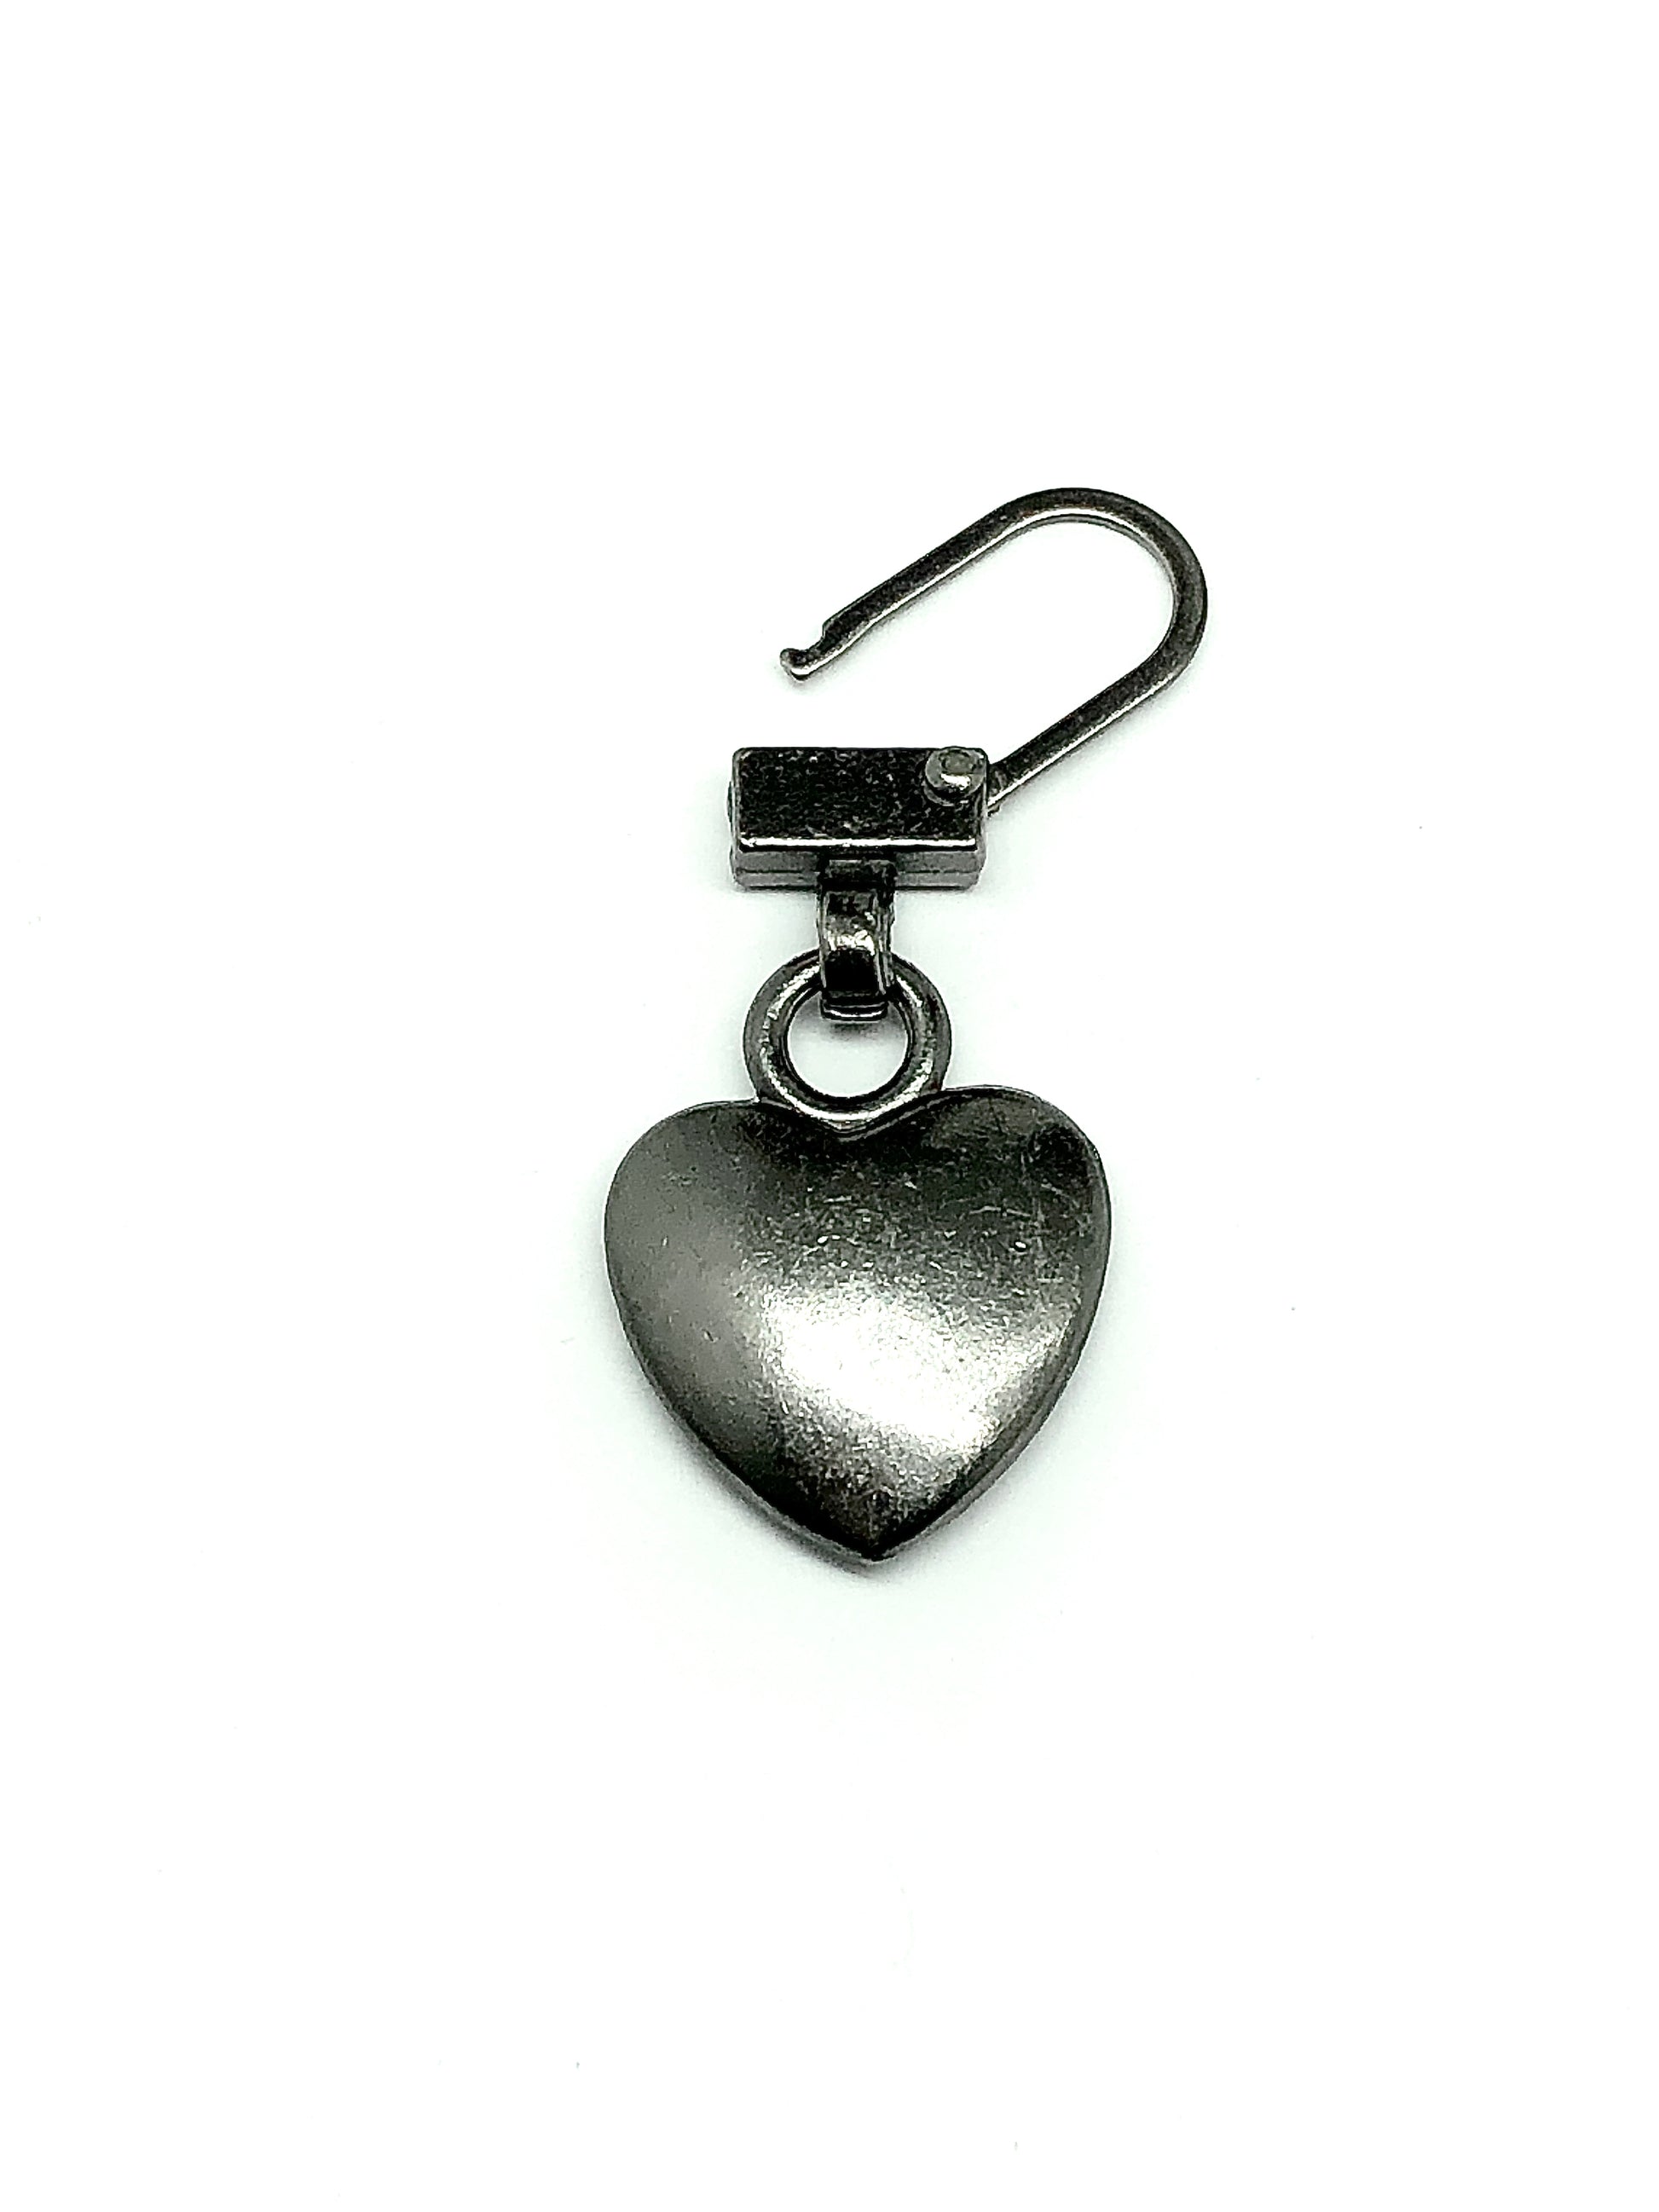 Zipper Pull Repair Charm - Rustic Graphite Heart Zipper Charm for Repair / Decorative anything it can clip onto!